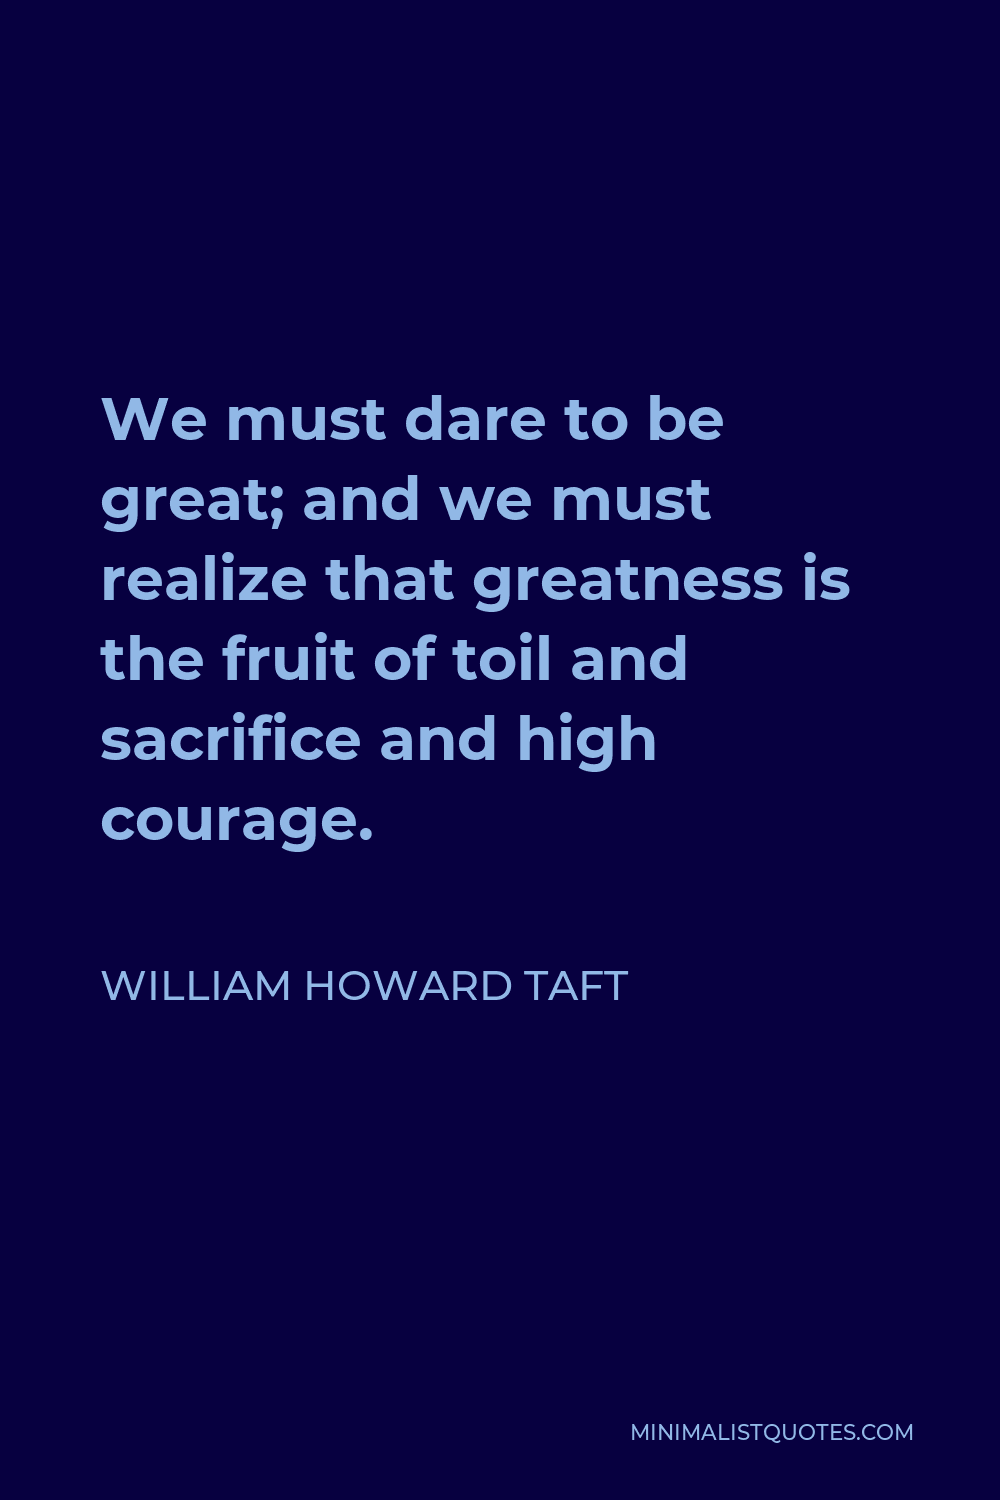 William Howard Taft Quote - We must dare to be great; and we must realize that greatness is the fruit of toil and sacrifice and high courage.